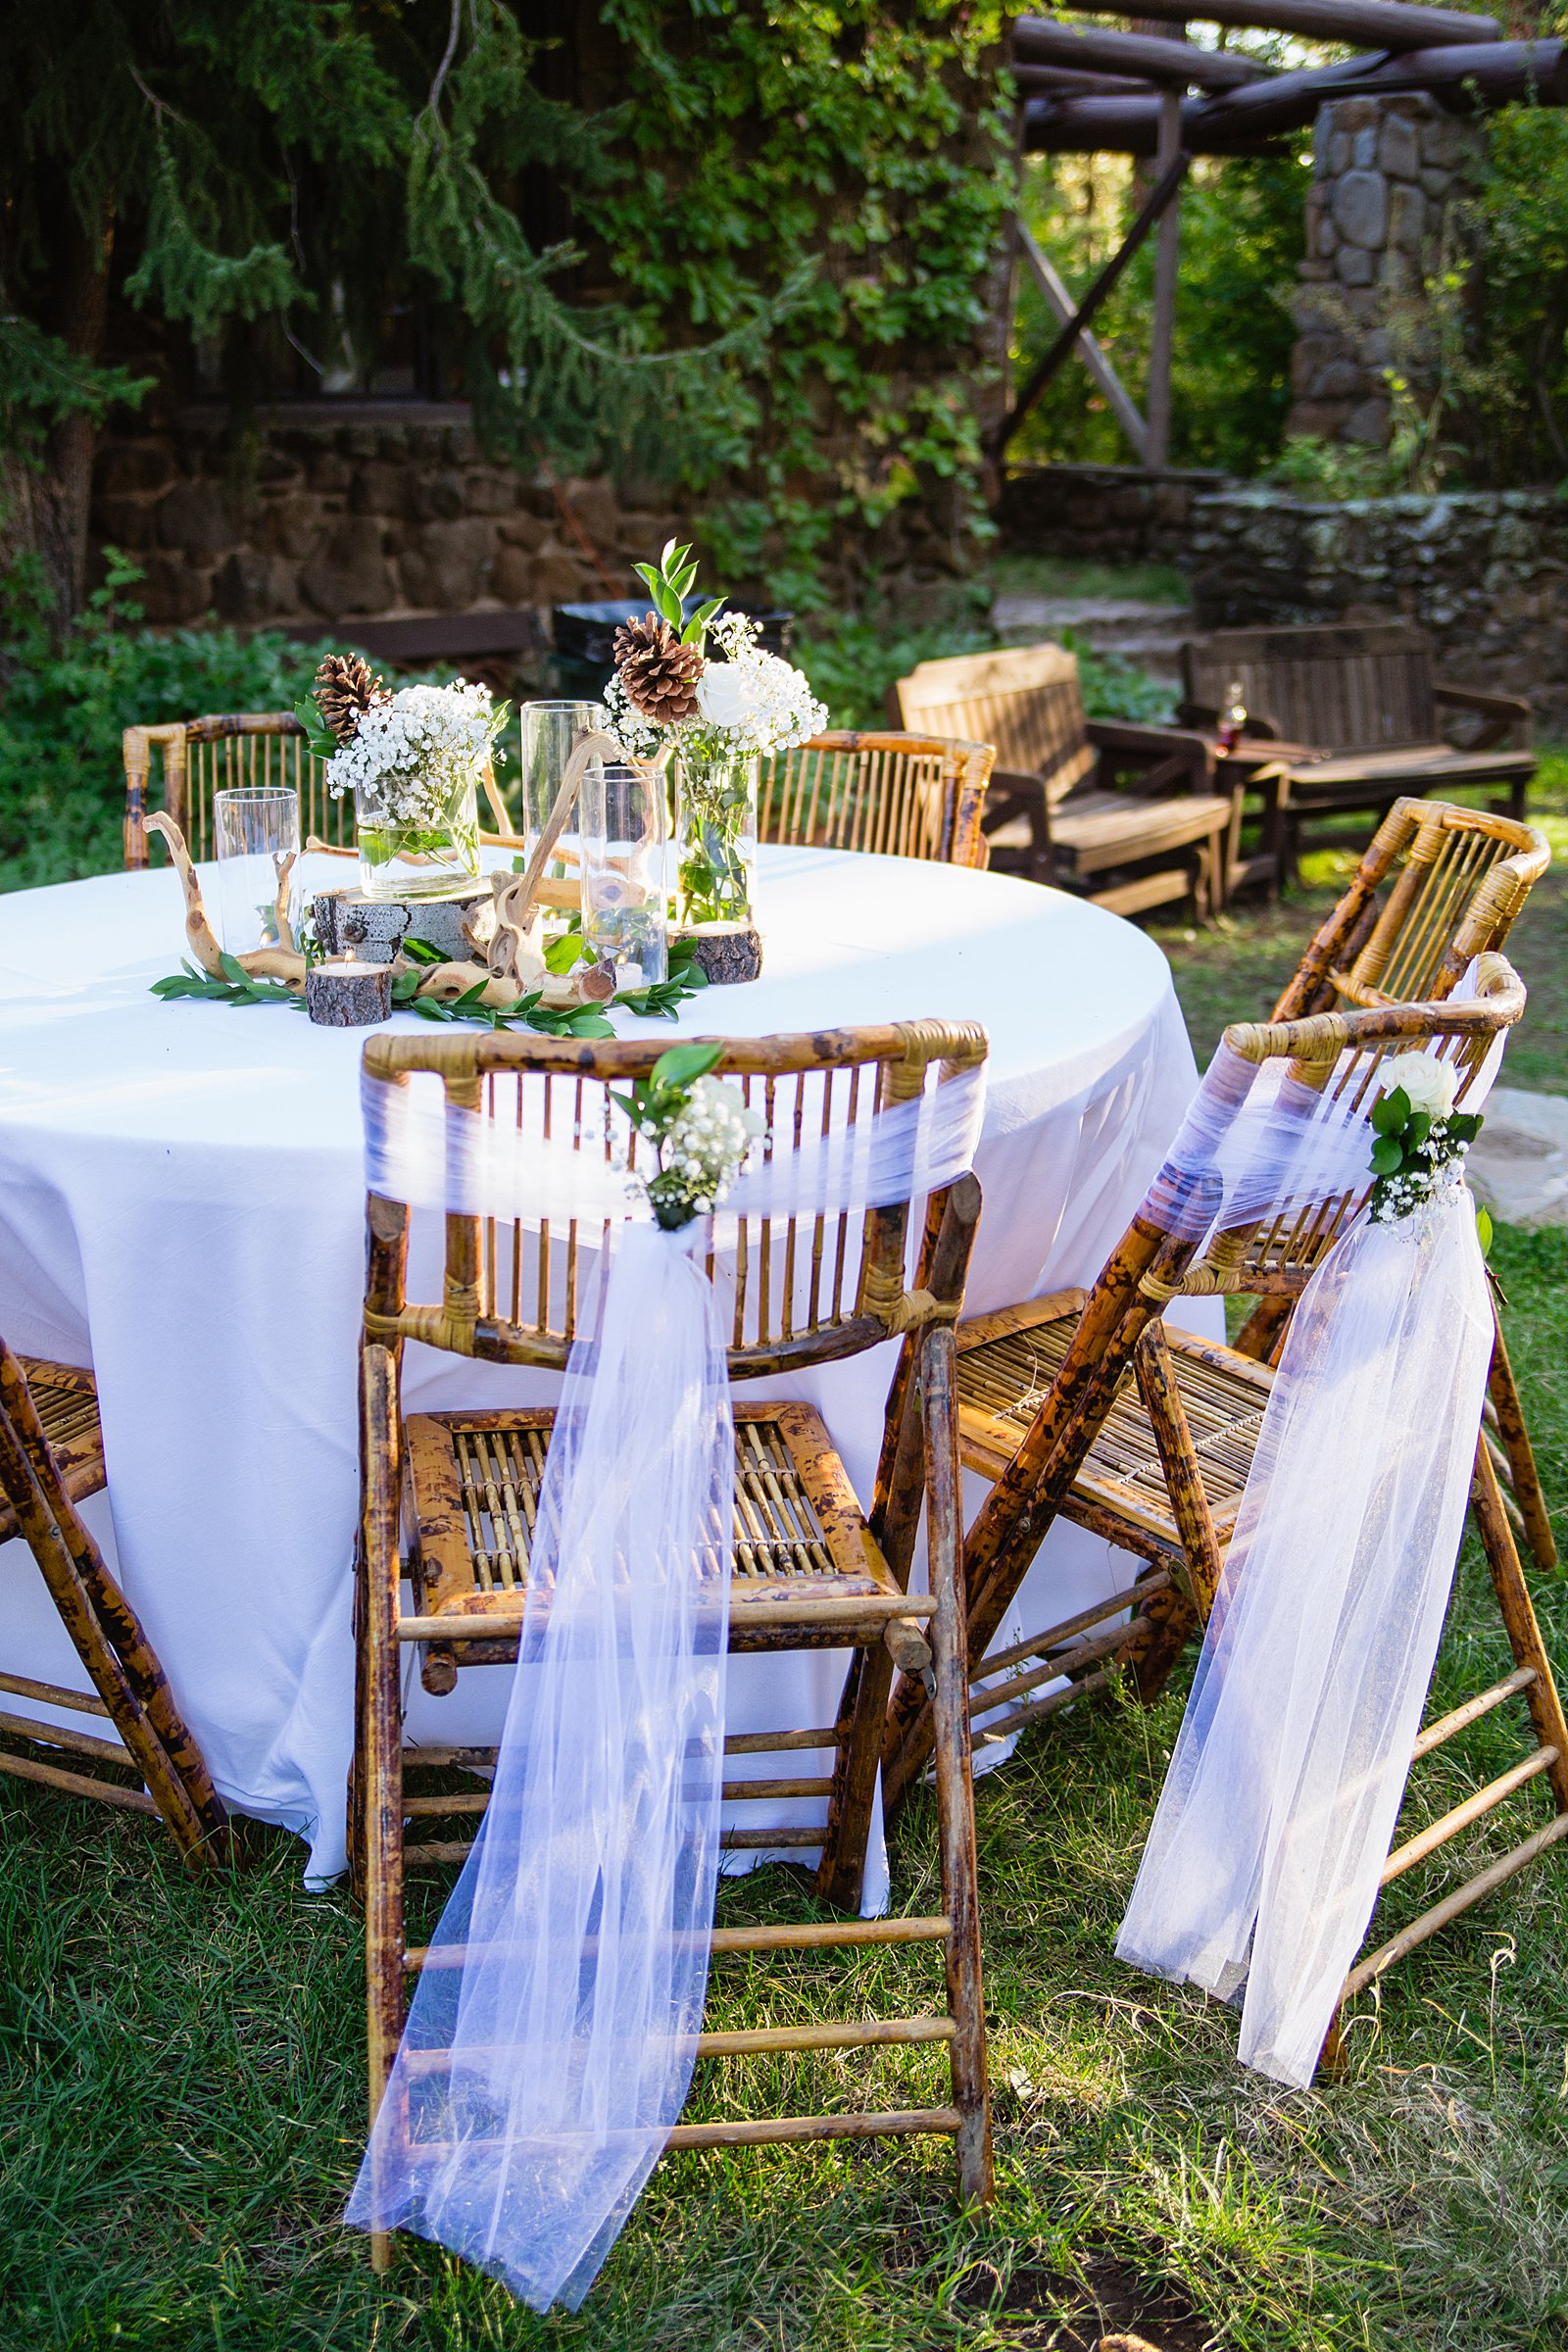 Rustic DIY centerpieces at The Colton House wedding reception by Flagstaff wedding photographer PMA Photography.